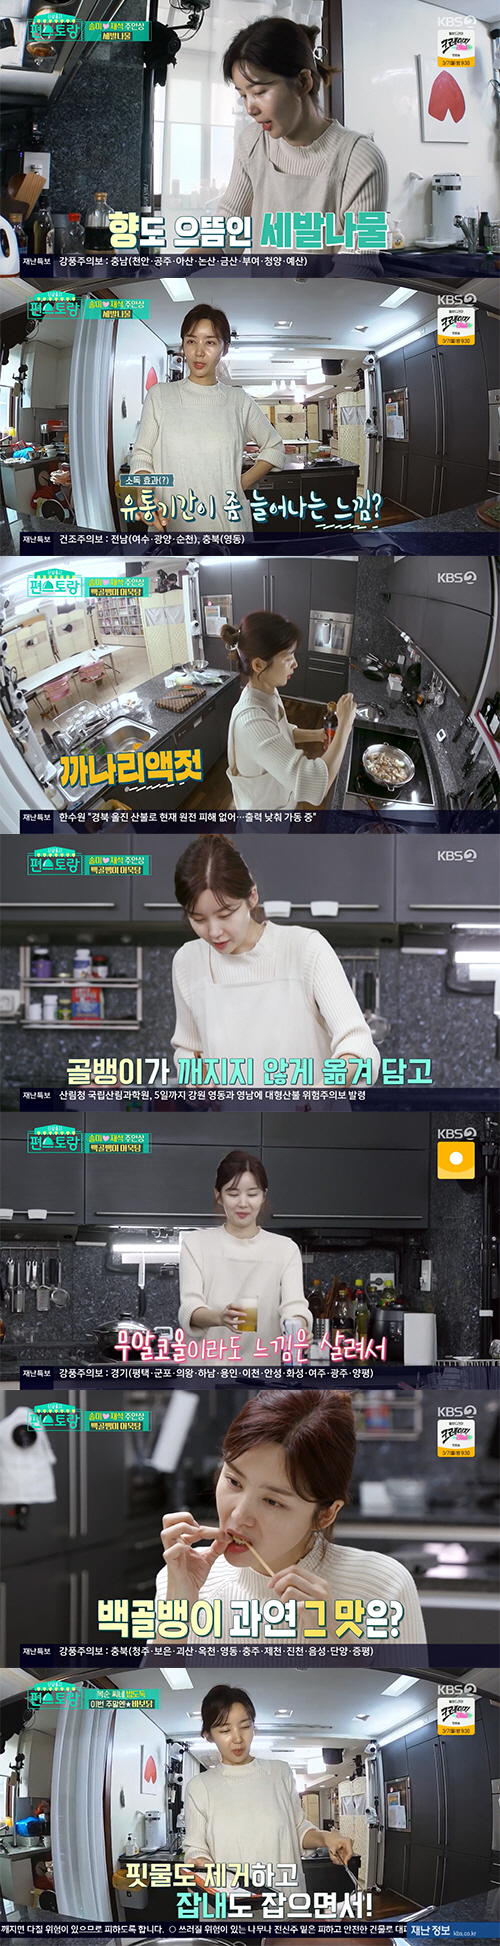 Former rhythmic gymnast Son Yeon-jaes love of chicken has been revealedOn the 4th KBS 2TV Stars Top Recipe at Fun-Staurant, a menu development contest was started on the theme of K-food representative Chicken.On this day, Lee Kyung-kyu visited Sindang-dong for various chicken cooking studies.This is because there is a chicken restaurant in Sindang-dong alley, which is emerging as a hot place among MZ generations recently.So Lee Kyung-kyus footsteps stopped, and the oak firewood chicken roasted with a subtle smell.Today we invited special guests, the chicken Pythagoras (a chicken-loving group), Im sure, Lee Kyung-kyu said.Basketball president Hur Jae, Devil second baseman Jung Geun-woo and gymnastics fairy Son Yeon-jae appeared.The Stars Top Recipe at Fun-Staurant family were surprised by the appearance of legend sports stars.Lee Kyung-kyu, who boasted of his unexpected connections, said, The series came to our daughter (Lee Ye-rim) wedding, attracted Eye-catching; Hur Jae also said, Ive seen the series since high school.My son Woong is also close to Hoon. Son Yeon-jae also made a huge chicken love Confessions; Son Yeon-jae said, I really like chicken.I retired and fell into Chicken and gained 6kg of weight. The first menu appeared in front of the members of the Pythagoras, the king of the classic chicken dish, Lee Kyung-kyu, who said, Lets not fight, lets eat half a dozen.Son Yeon-jae also said, I like breasts that are more puffy than chicken legs.Then, the chicken war appeared as the next dish: The members of Pythagoras admired it, saying, Its very moist, its really delicious. Lee Kyung-kyu said, Im not going to eat meat now.Its a chicken war now, he said.Hur Jae also said, I really like chicken. I once ate snakes. I rot snakes. Its a chicken. Its really delicious. But its a little expensive.I do about 800,000 won per one, he surprised everyone.Hur Jae said, After eating, the fatigue was fast. Hur Jae also joked that I ate it and my hair was thin.The next dish was a chicken sand house popped with fries. The crowd was impressed by the great texture.Finally, chicken soup soup soup soup soup appeared, and all of the visuals of chicken soup were surprised.On the same day, Jung Sung-hoon was sitting full-set, and Boom laughed at him saying, Why are you so artificial?At Jung Sung-hoons house, a doorbell rang and a familiar voice was heard over the intercom: Jung Sung-hoon, its me.I am, the voice of actor Han Suk-kyu surprised everyone, but not Han Suk-kyu, who was a human copying comedian Jung Sung-ho.Jung Sung-ho is called Human Copy by giving a smile to the perfect vocalization and facial expression of many top stars such as Han Suk-kyu, Seo Kyung Suk, Lim Jae Bum, Son Seok Hee, Baek Jong Won, Kim Soo Mi and Yoon Do Hyun.Jung Sung-hoon is a close friend of Jung Sung-hoon, who has been in business for 25 years since college.Jung Sung-ho, who entered the Jung Sung-hoon house with a voice of Han Suk-kyu, showed a series of vocal simulations of various stars before he could say a few words in his voice.Also, the sympathy talk of Father Jung Sung-ho and Brother and Sister Father Jung Sung-ho was revealed.When Jung Sung-hoon was not third, The third must be born.The happiness of the daughter is different, Jung Sung-hos powerful advice and the story of having a youngest son, Jung Sung-ho, gave birth to a son and called Its my brothers son.Jung Sung-hoon has unveiled a three-carry recipe for the Brother and Sister Father Jung Sung-ho.However, Jung Sung-ho suspected that carry is not all similar in taste.Jung Sung-hoon also constantly summoned top stars to add laughter while examining the completed curry.Jung Sung-ho, who also tasted the finished curry, was surprised that it was a really luxurious taste; Jung Sung-hoon said, This is the basic curry; intermediate, high-end remains.Jung Sung-ho, who even tasted the high-end course, was surprised, saying, Its a real jackpot, this is what you made? Jung Sung-ho said, I thought when I came here honestly.I have never done anything to my mother-in-law. I am sorry to always receive it. I want to cook for my mother-in-law. Jung Sung-hoon completed the chive chicken roasting as a dish for his mother-in-law, and Park Sol-mi and Jang Won-young, who watched the video, admired it as it is really delicious.On the same day, Park Sol-mi, a representative recipe rich, will unveil a super-class recipe that anyone can easily follow and taste at home.Park Sol-mi pulled out a large envelope that had been in the field himself and raised questions: the ingredients in the black envelope were three nulls.Samul, a seaweed fruit that grows on salty foreshores, is a savory savory menu. The snack menu that Park Sol-mi chose as the samul was the samul.The recipe, which is not only cheap but also easy to follow, is a snack menu that Park Sol-mi usually eats with her husband.Park Sol-mi even made a soothing sauce with the tribal before the tribal, attracting Eye-catching.All the Stars Top Recipe at Fun-Staurant family members were tongued in the visuals that the mouth was swallowing.Park Sol-mi was happy to receive the delivery she had been waiting for. It was a fresh white gongbang.The white goose can be purchased at a little cheaper in spring than in winter; Park Sol-mi added skewer fish cake after making a cool white goose bangtang with his own secret.The collection of Park Sol-mis Spring Edition Juansang was completed with the Samul exhibition and the Baekgolbang fish cake soup. From this time on, Park Sol-mis full-scale free time began.Park Sol-mi said, My husband likes the white goose soup so much that if he eats with his husband, the amount is always insufficient. He said, I have to eat a lot when I can eat alone.